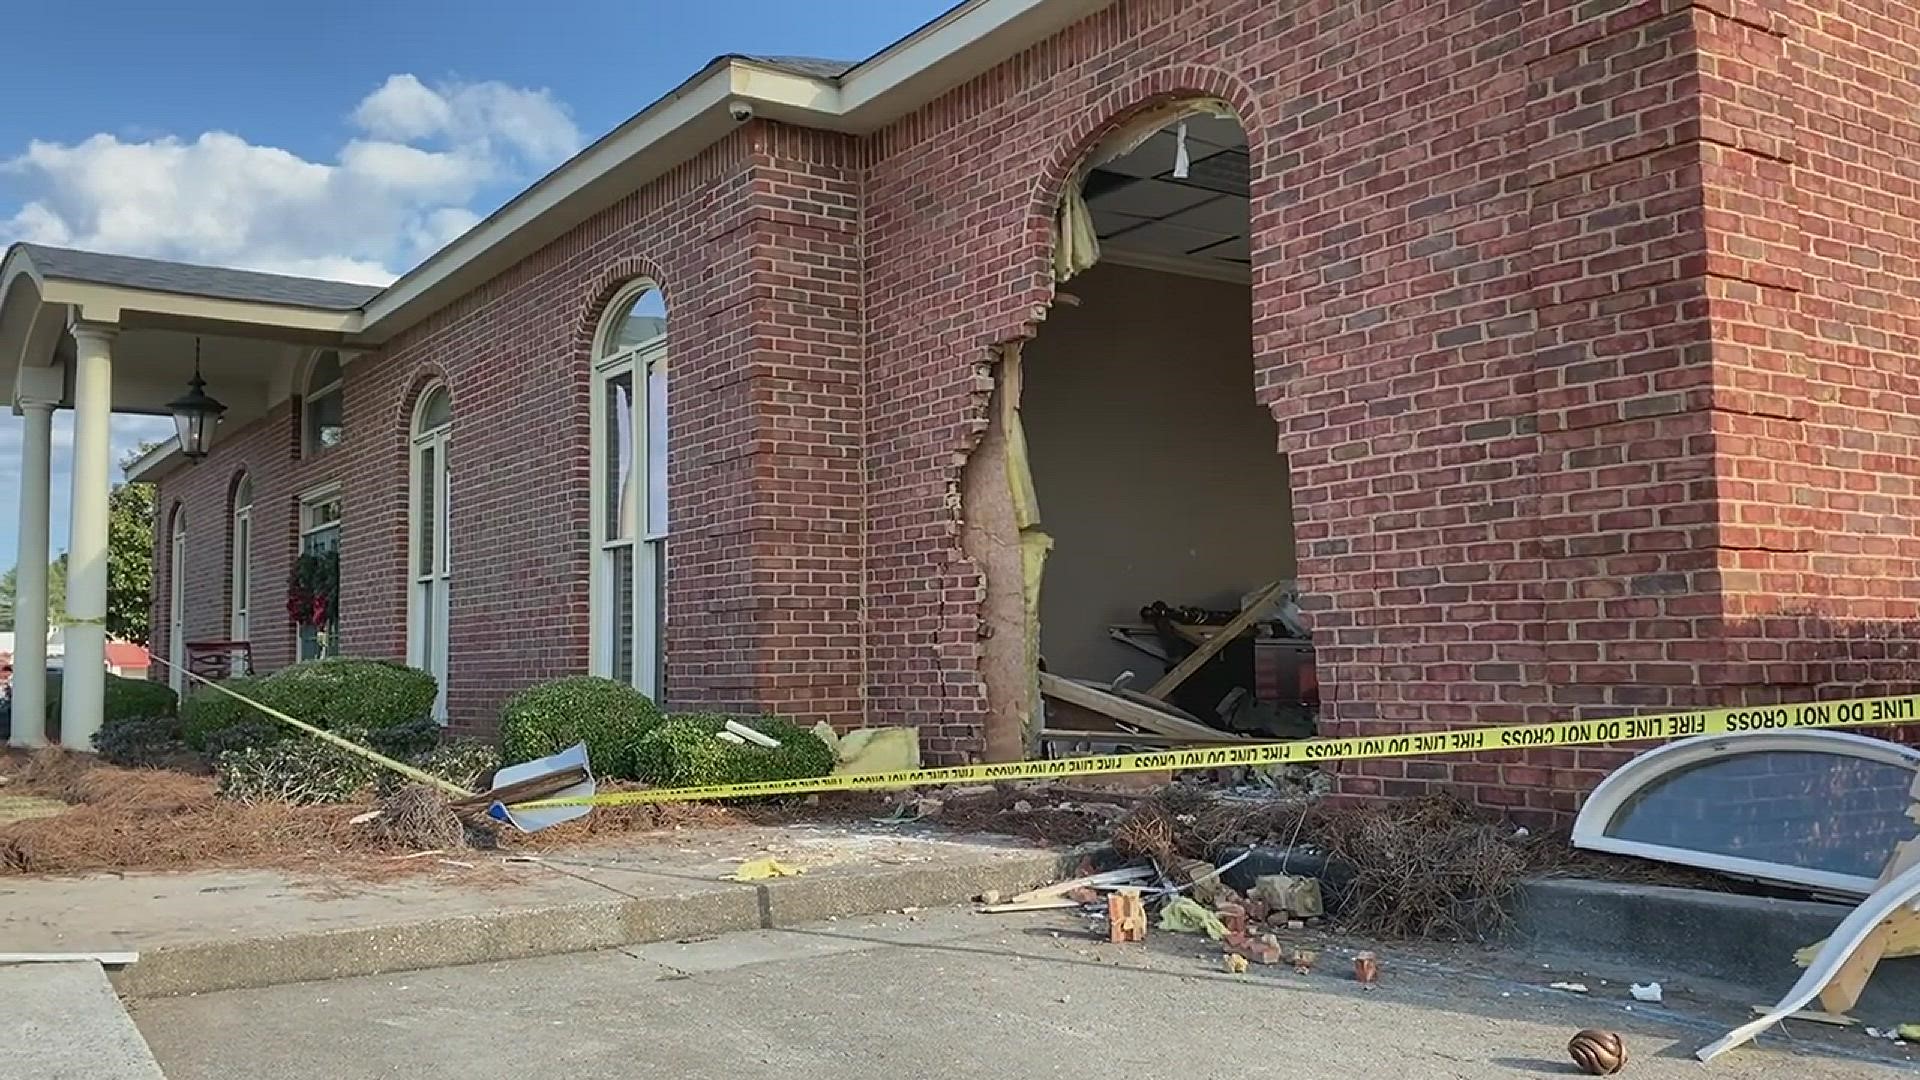 According to Mell Merritt with Magnolia State Bank, a driver crashed their Jeep into the side of the bank, leaving a large hole. No one was hurt.